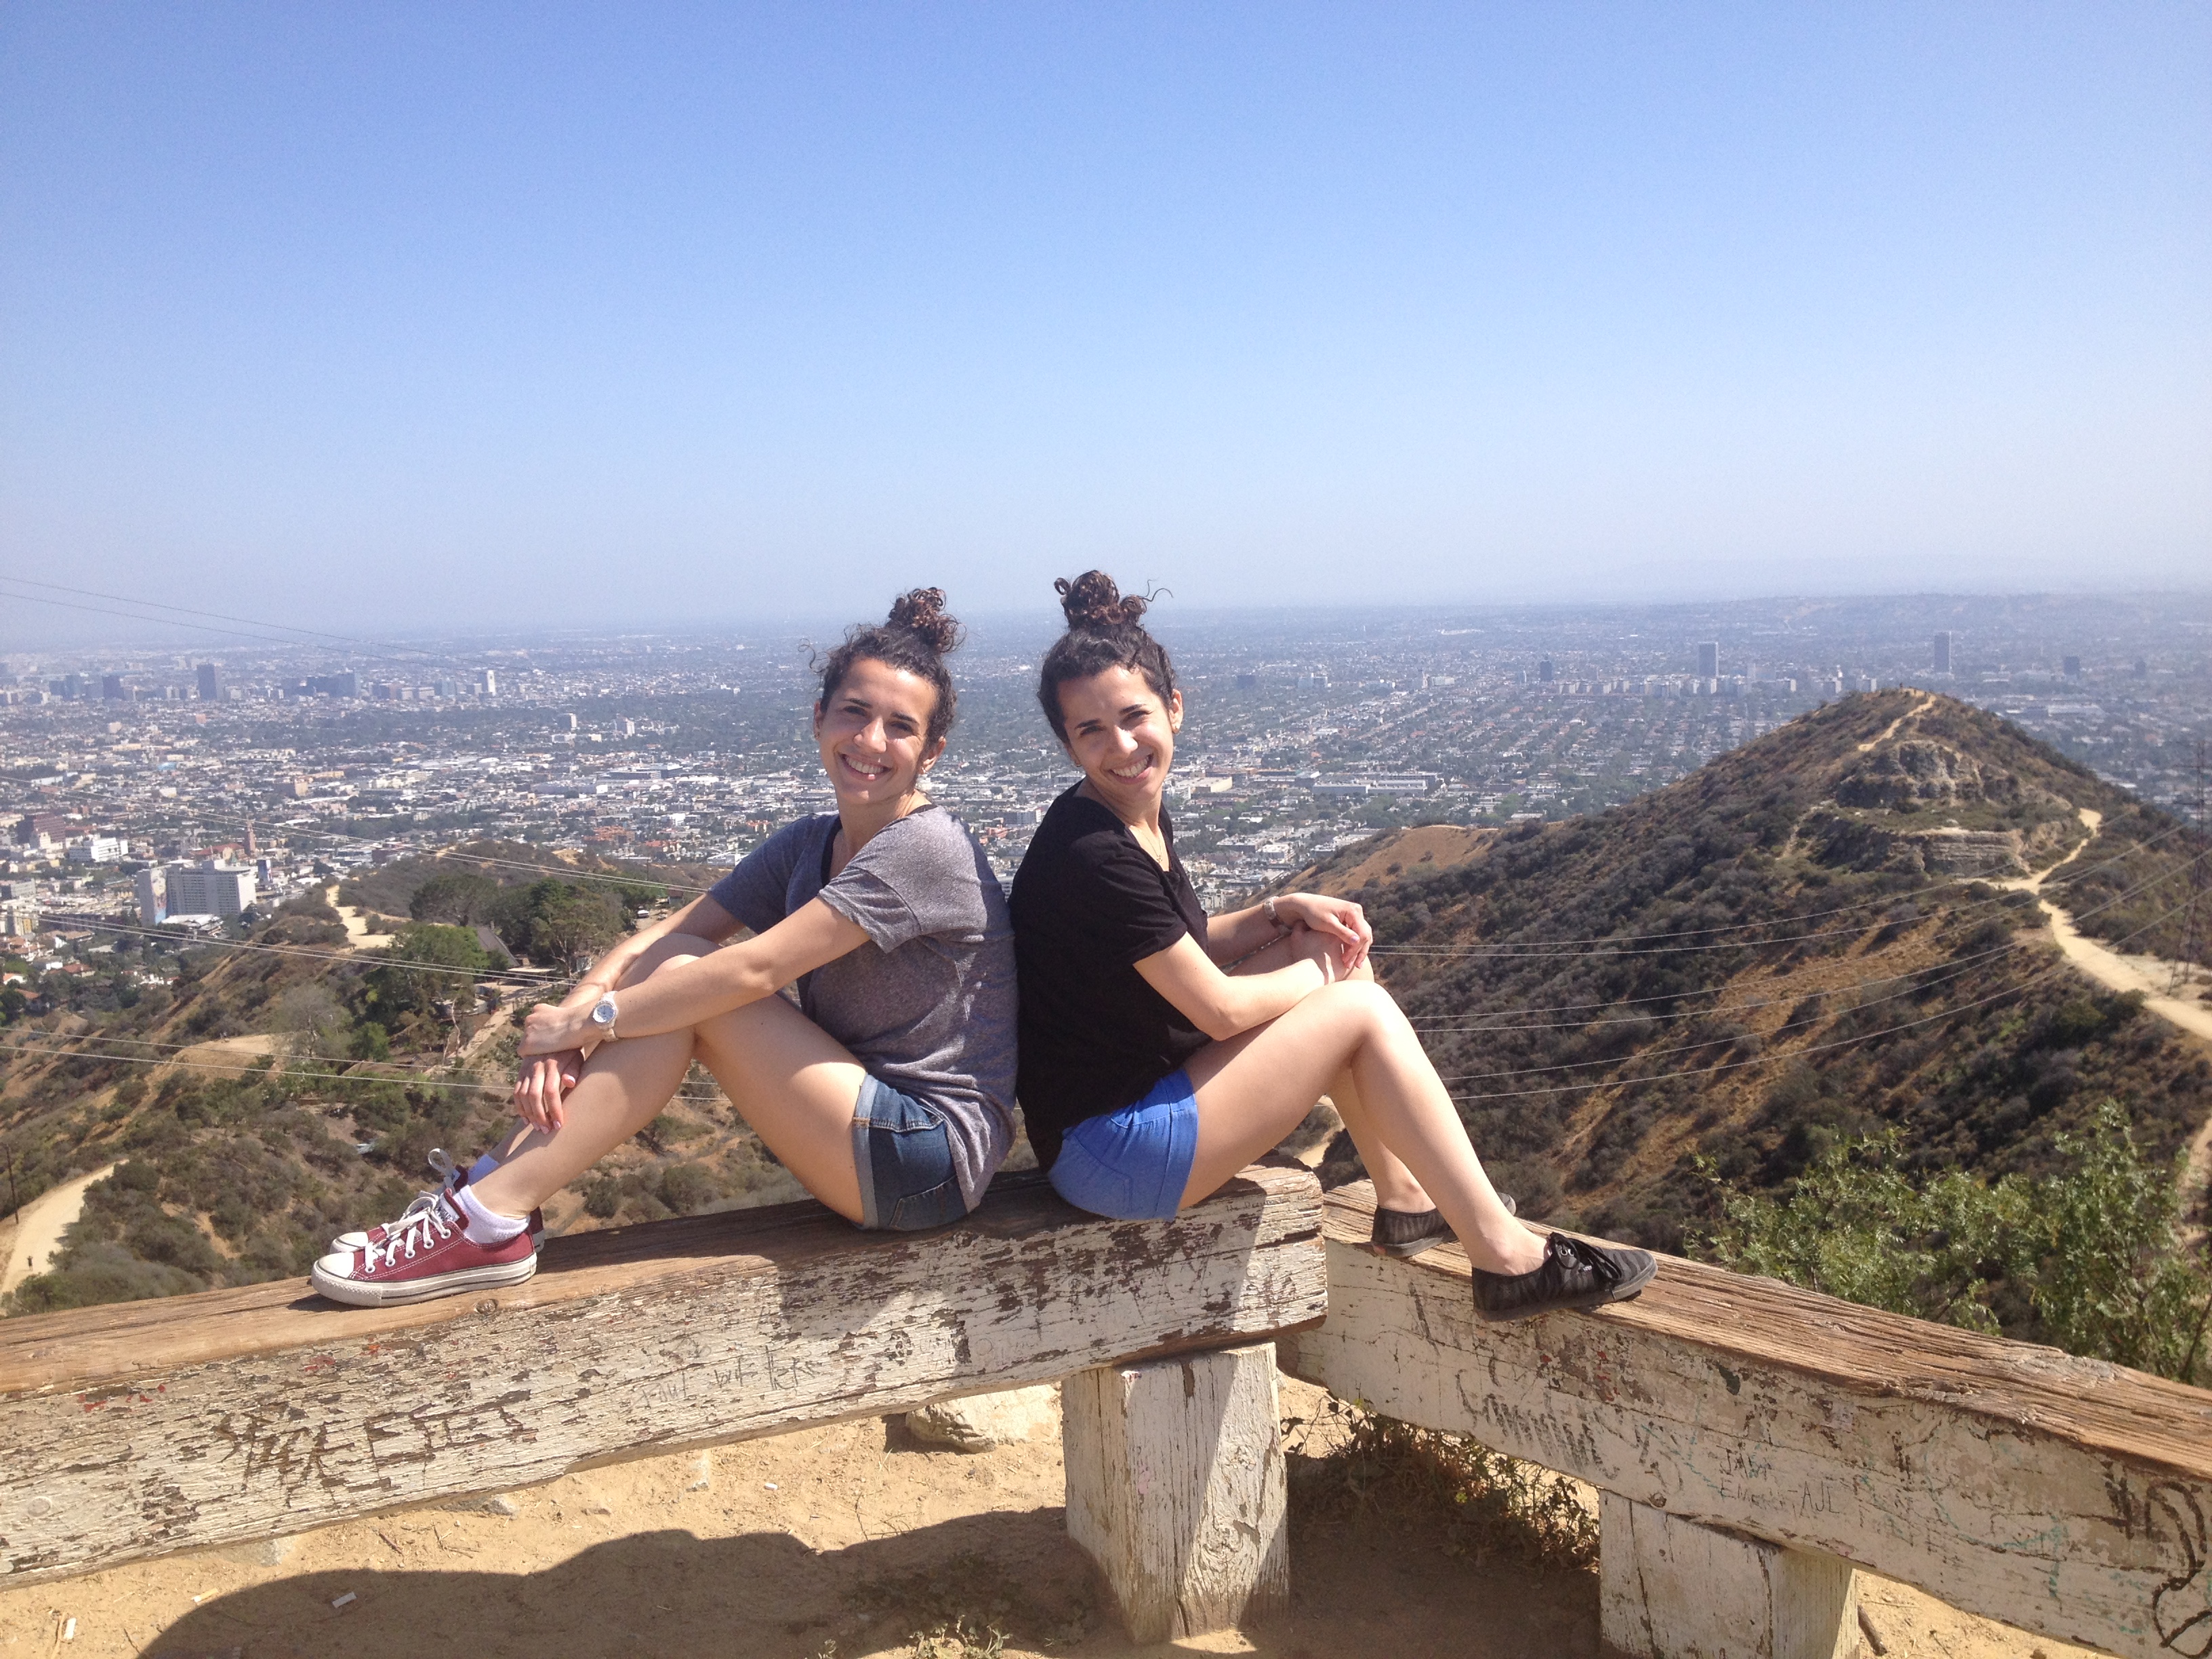 Lindsey and Alison Schwartz in Runyon Canyon, Los Angeles